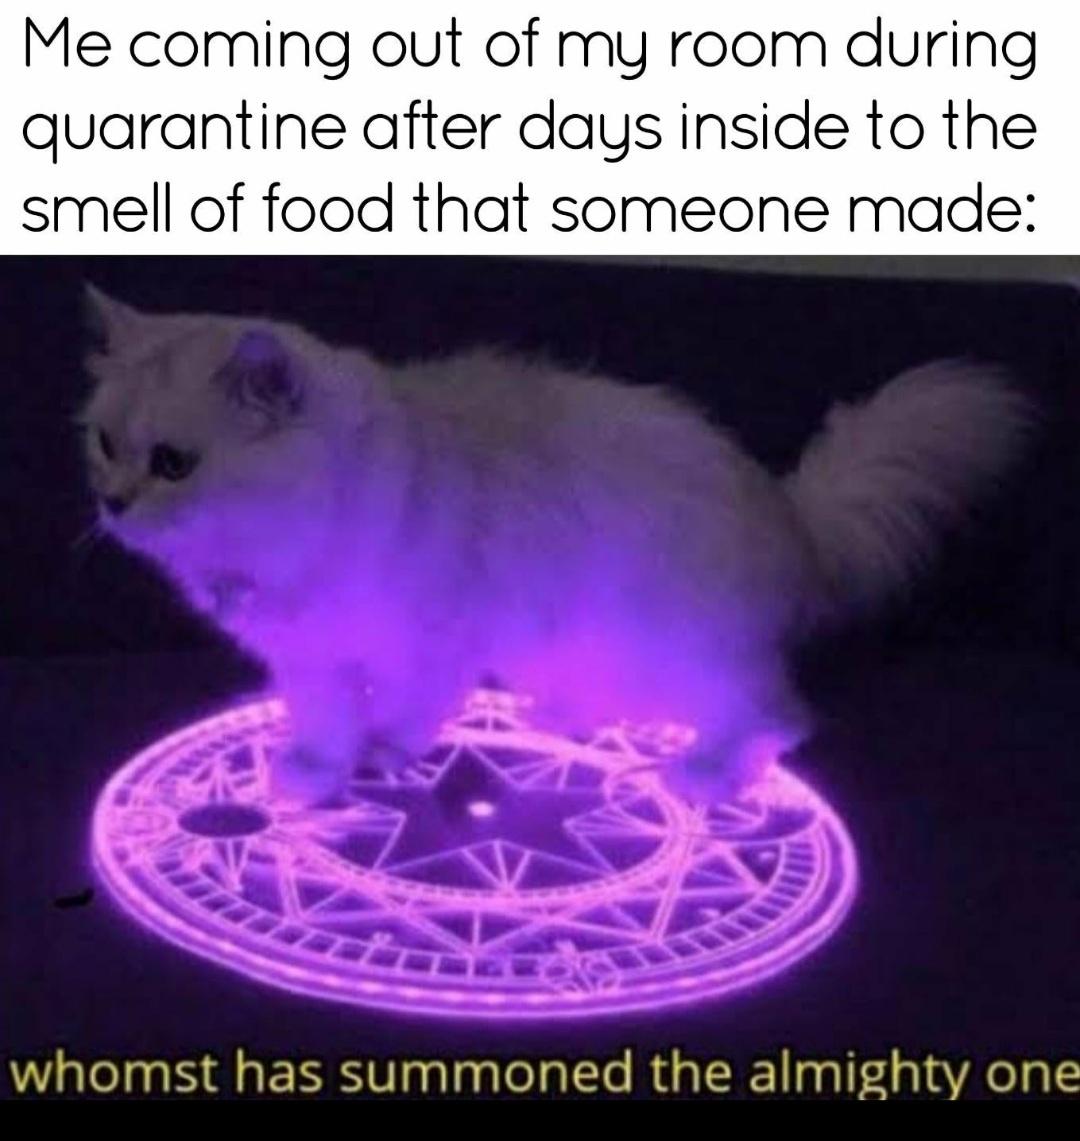 whomst has summon the almighty one - Me coming out of my room during quarantine after days inside to the smell of food that someone made whomst has summoned the almighty one